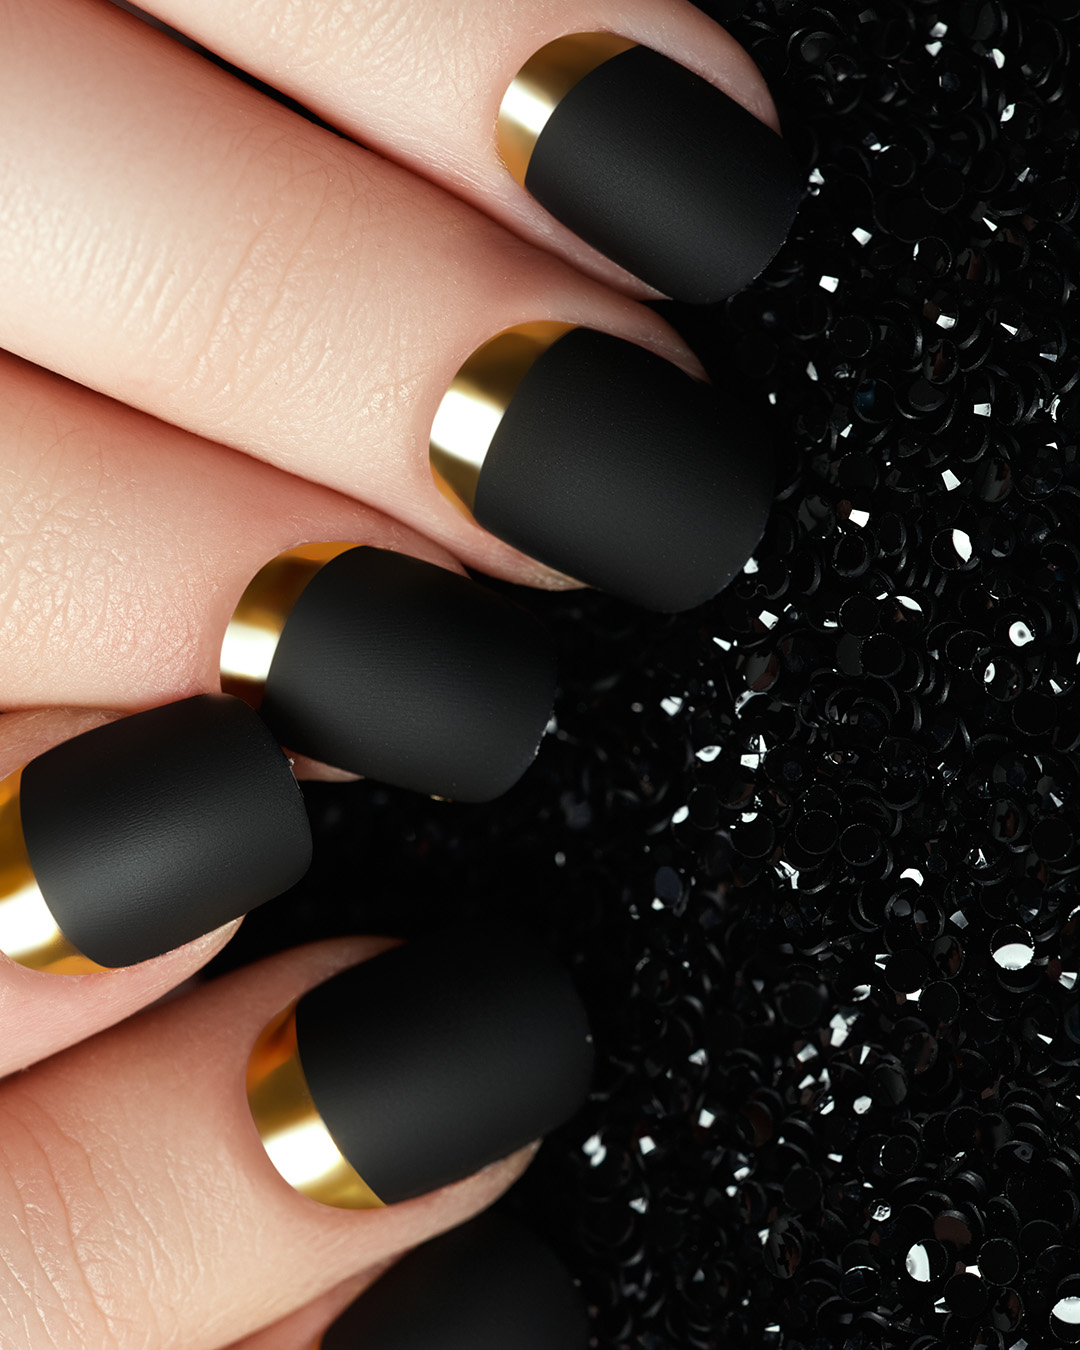 black and gold wedding nails matte and chrome - Black and Gold Wedding Nail Designs